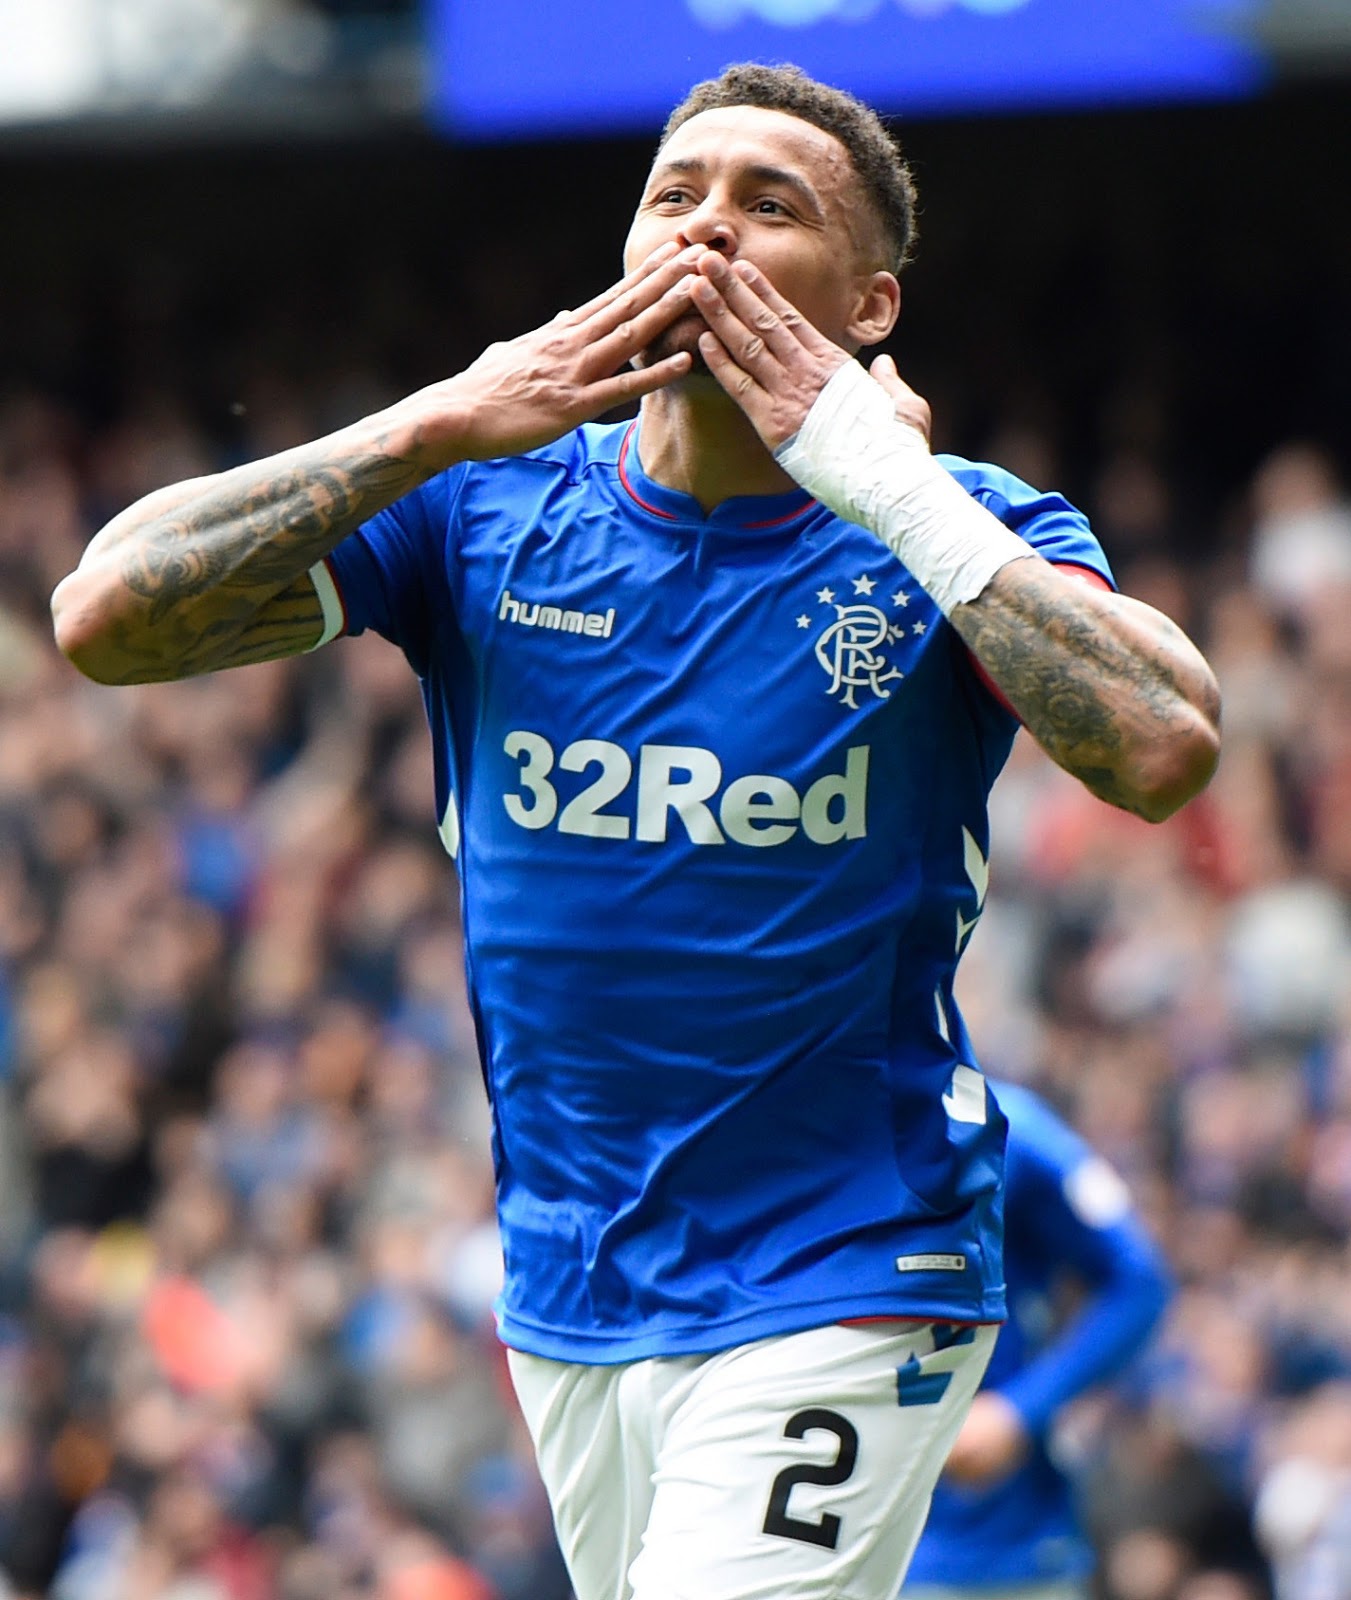 Top of Europe – the official stat which puts Rangers, and Tav, at number one